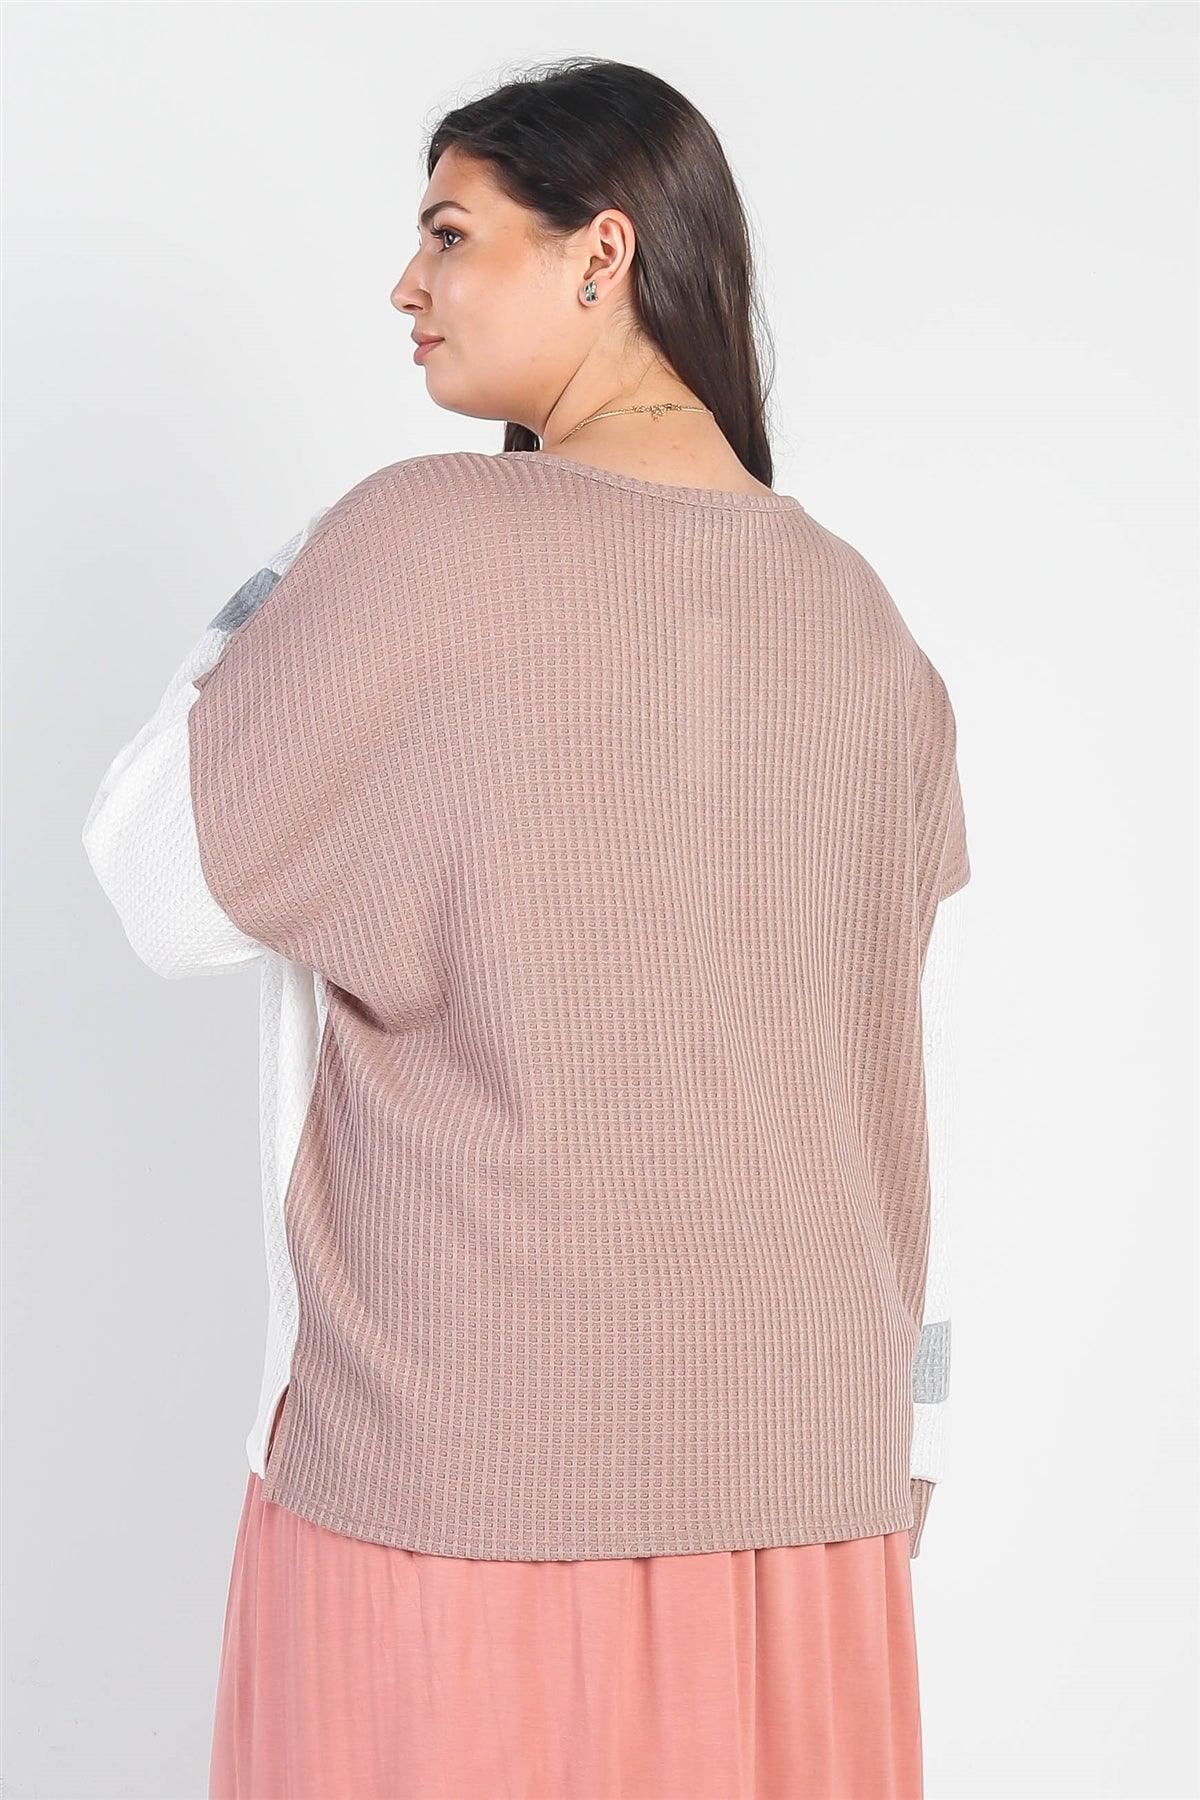 Junior Plus White & Cocoa Waffle Knit Long Sleeve Top /3-2-1